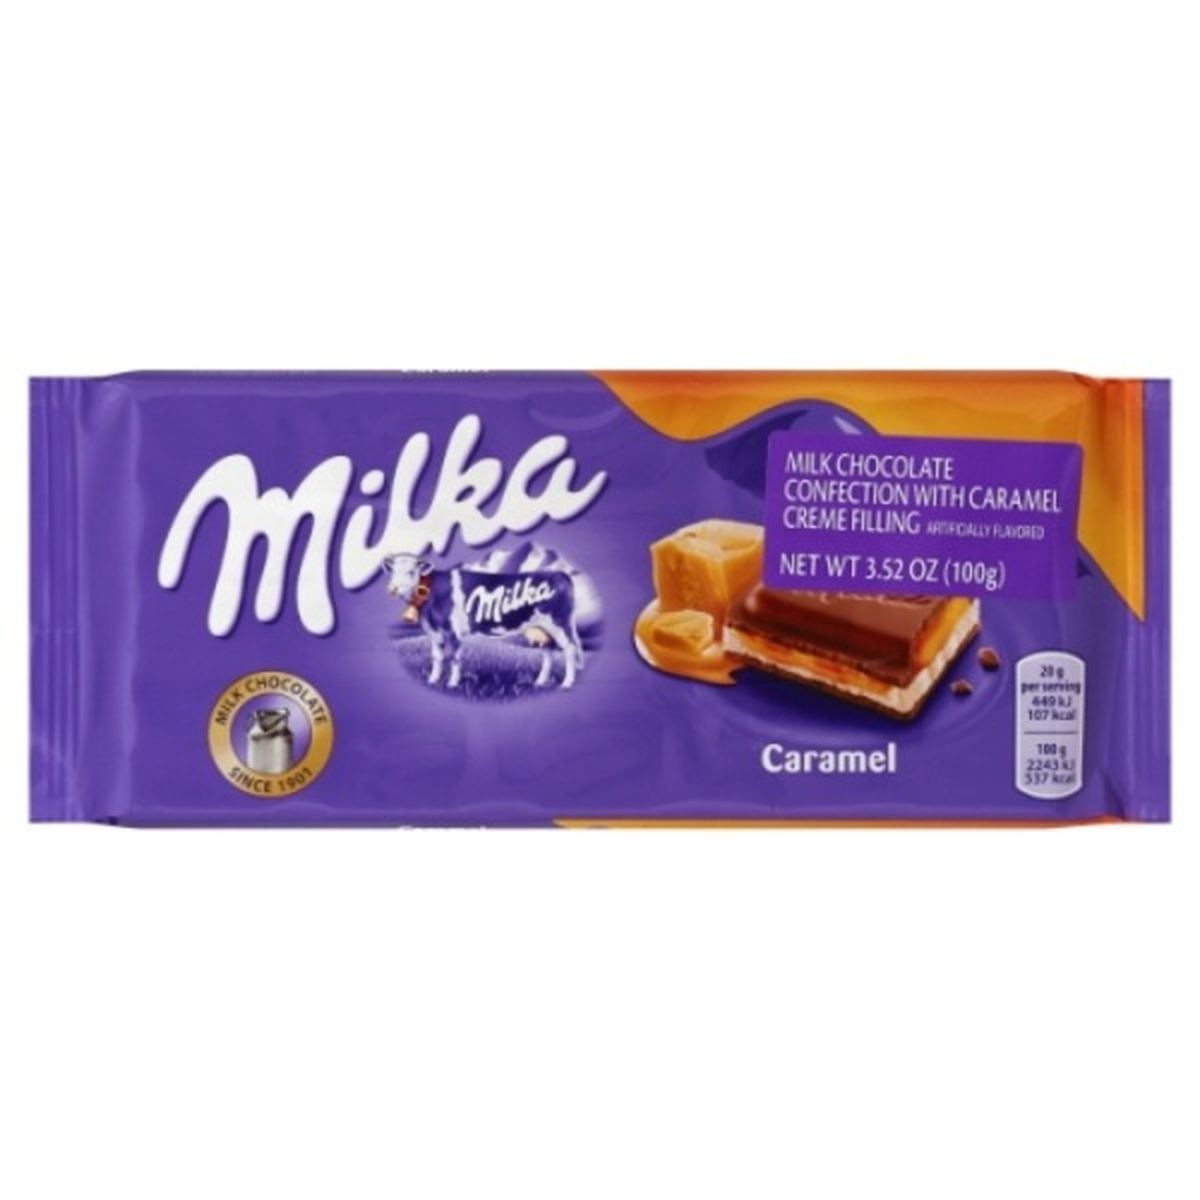 Calories in Milka Milk Chocolate Confection, with Caramel Creme Filling